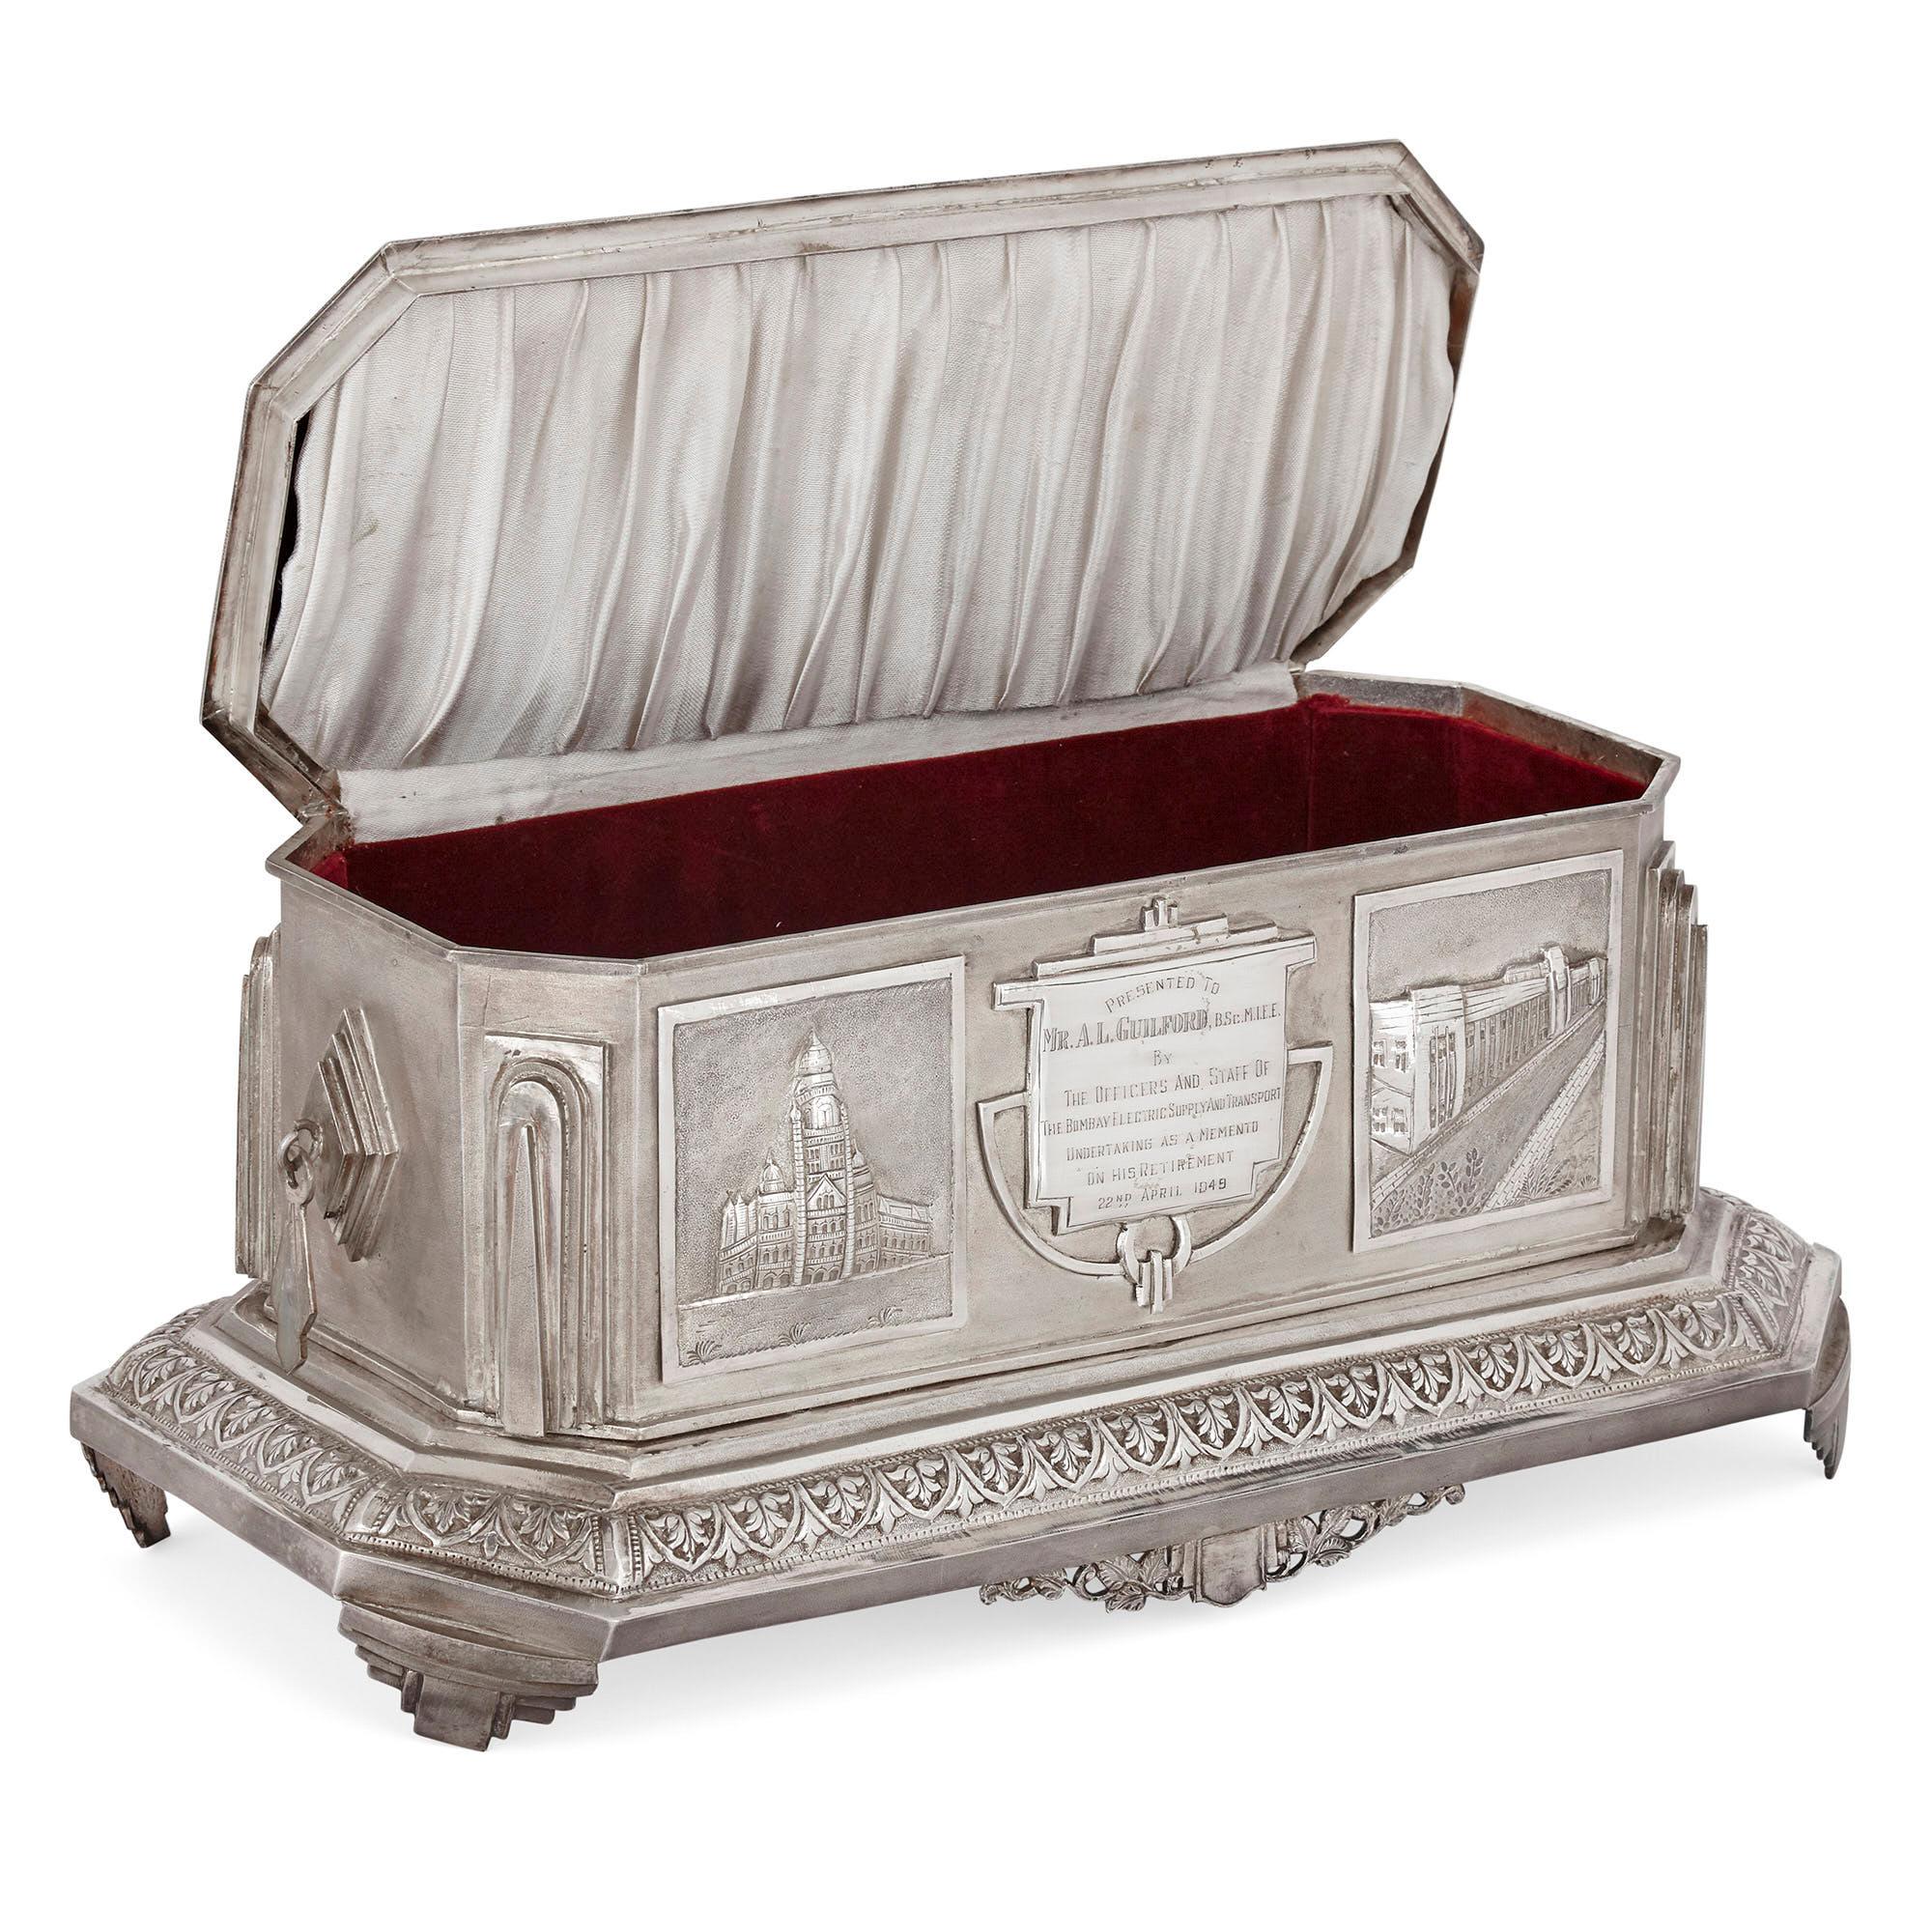 Anglo-Indian Art Deco Silver Presentation Casket In Good Condition For Sale In London, GB